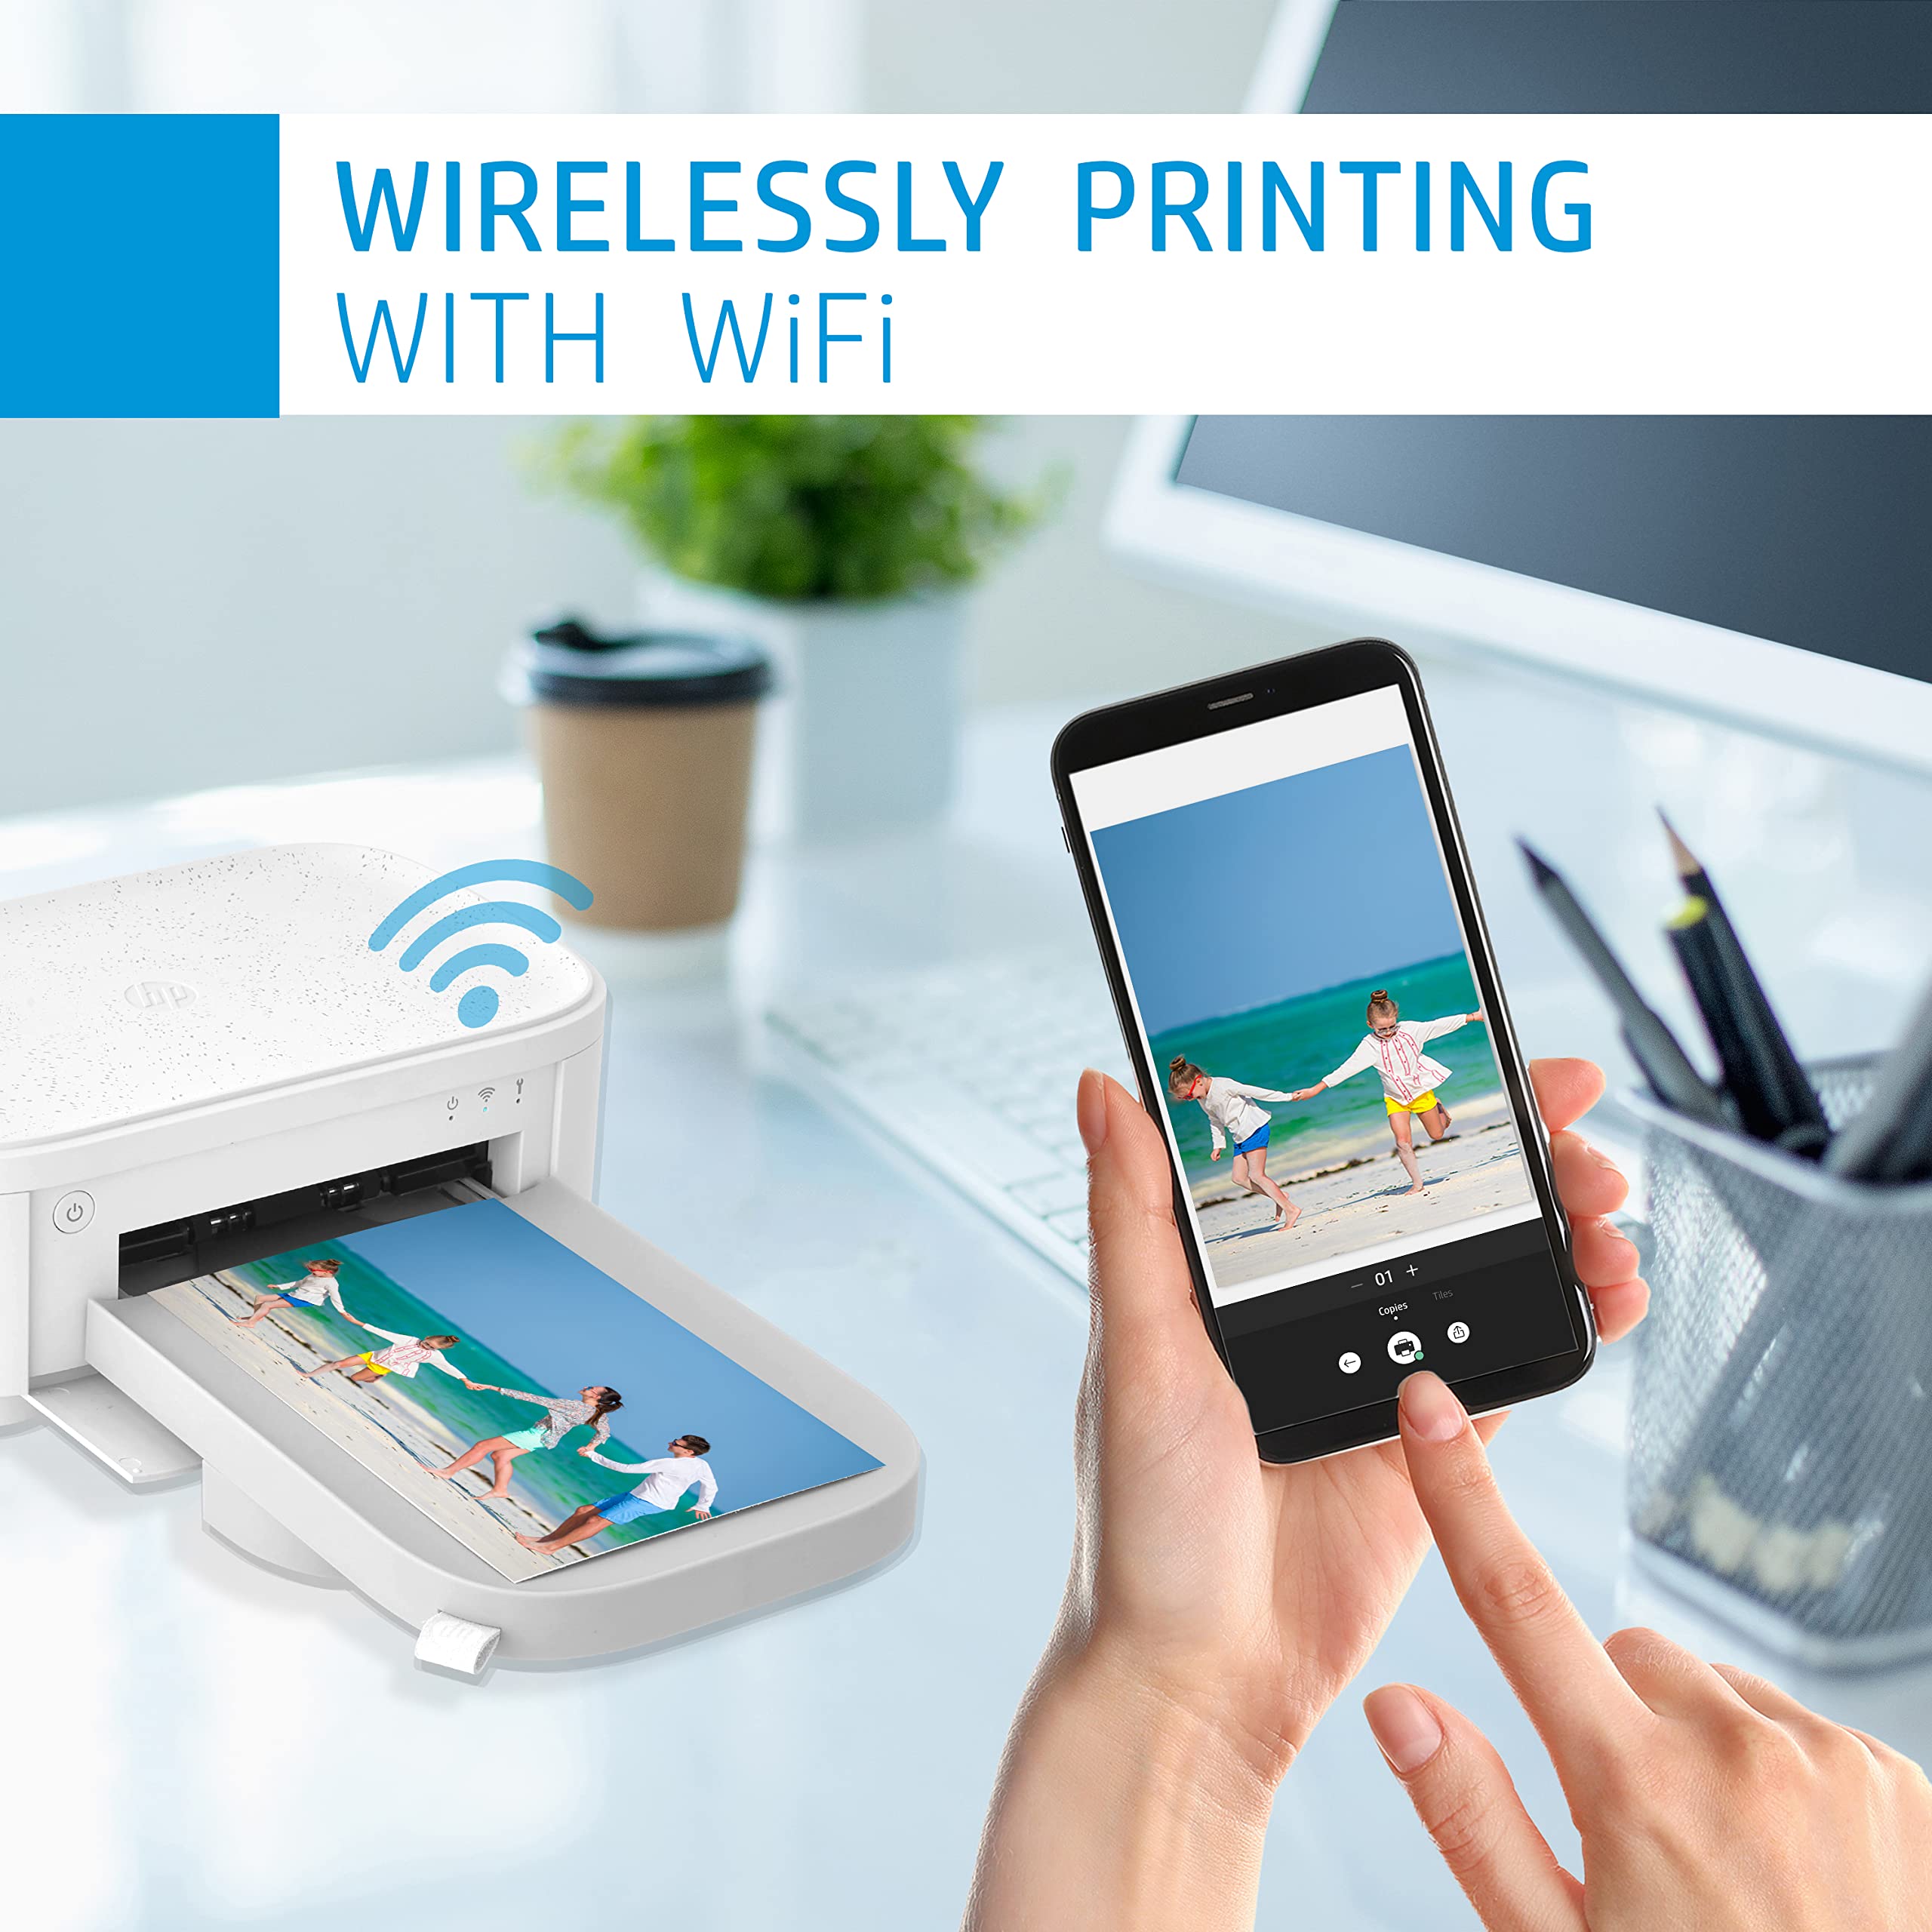 HP Sprocket Studio Plus WiFi Printer – Wirelessly Prints 4x6” Photos from Your iOS & Android Device, White